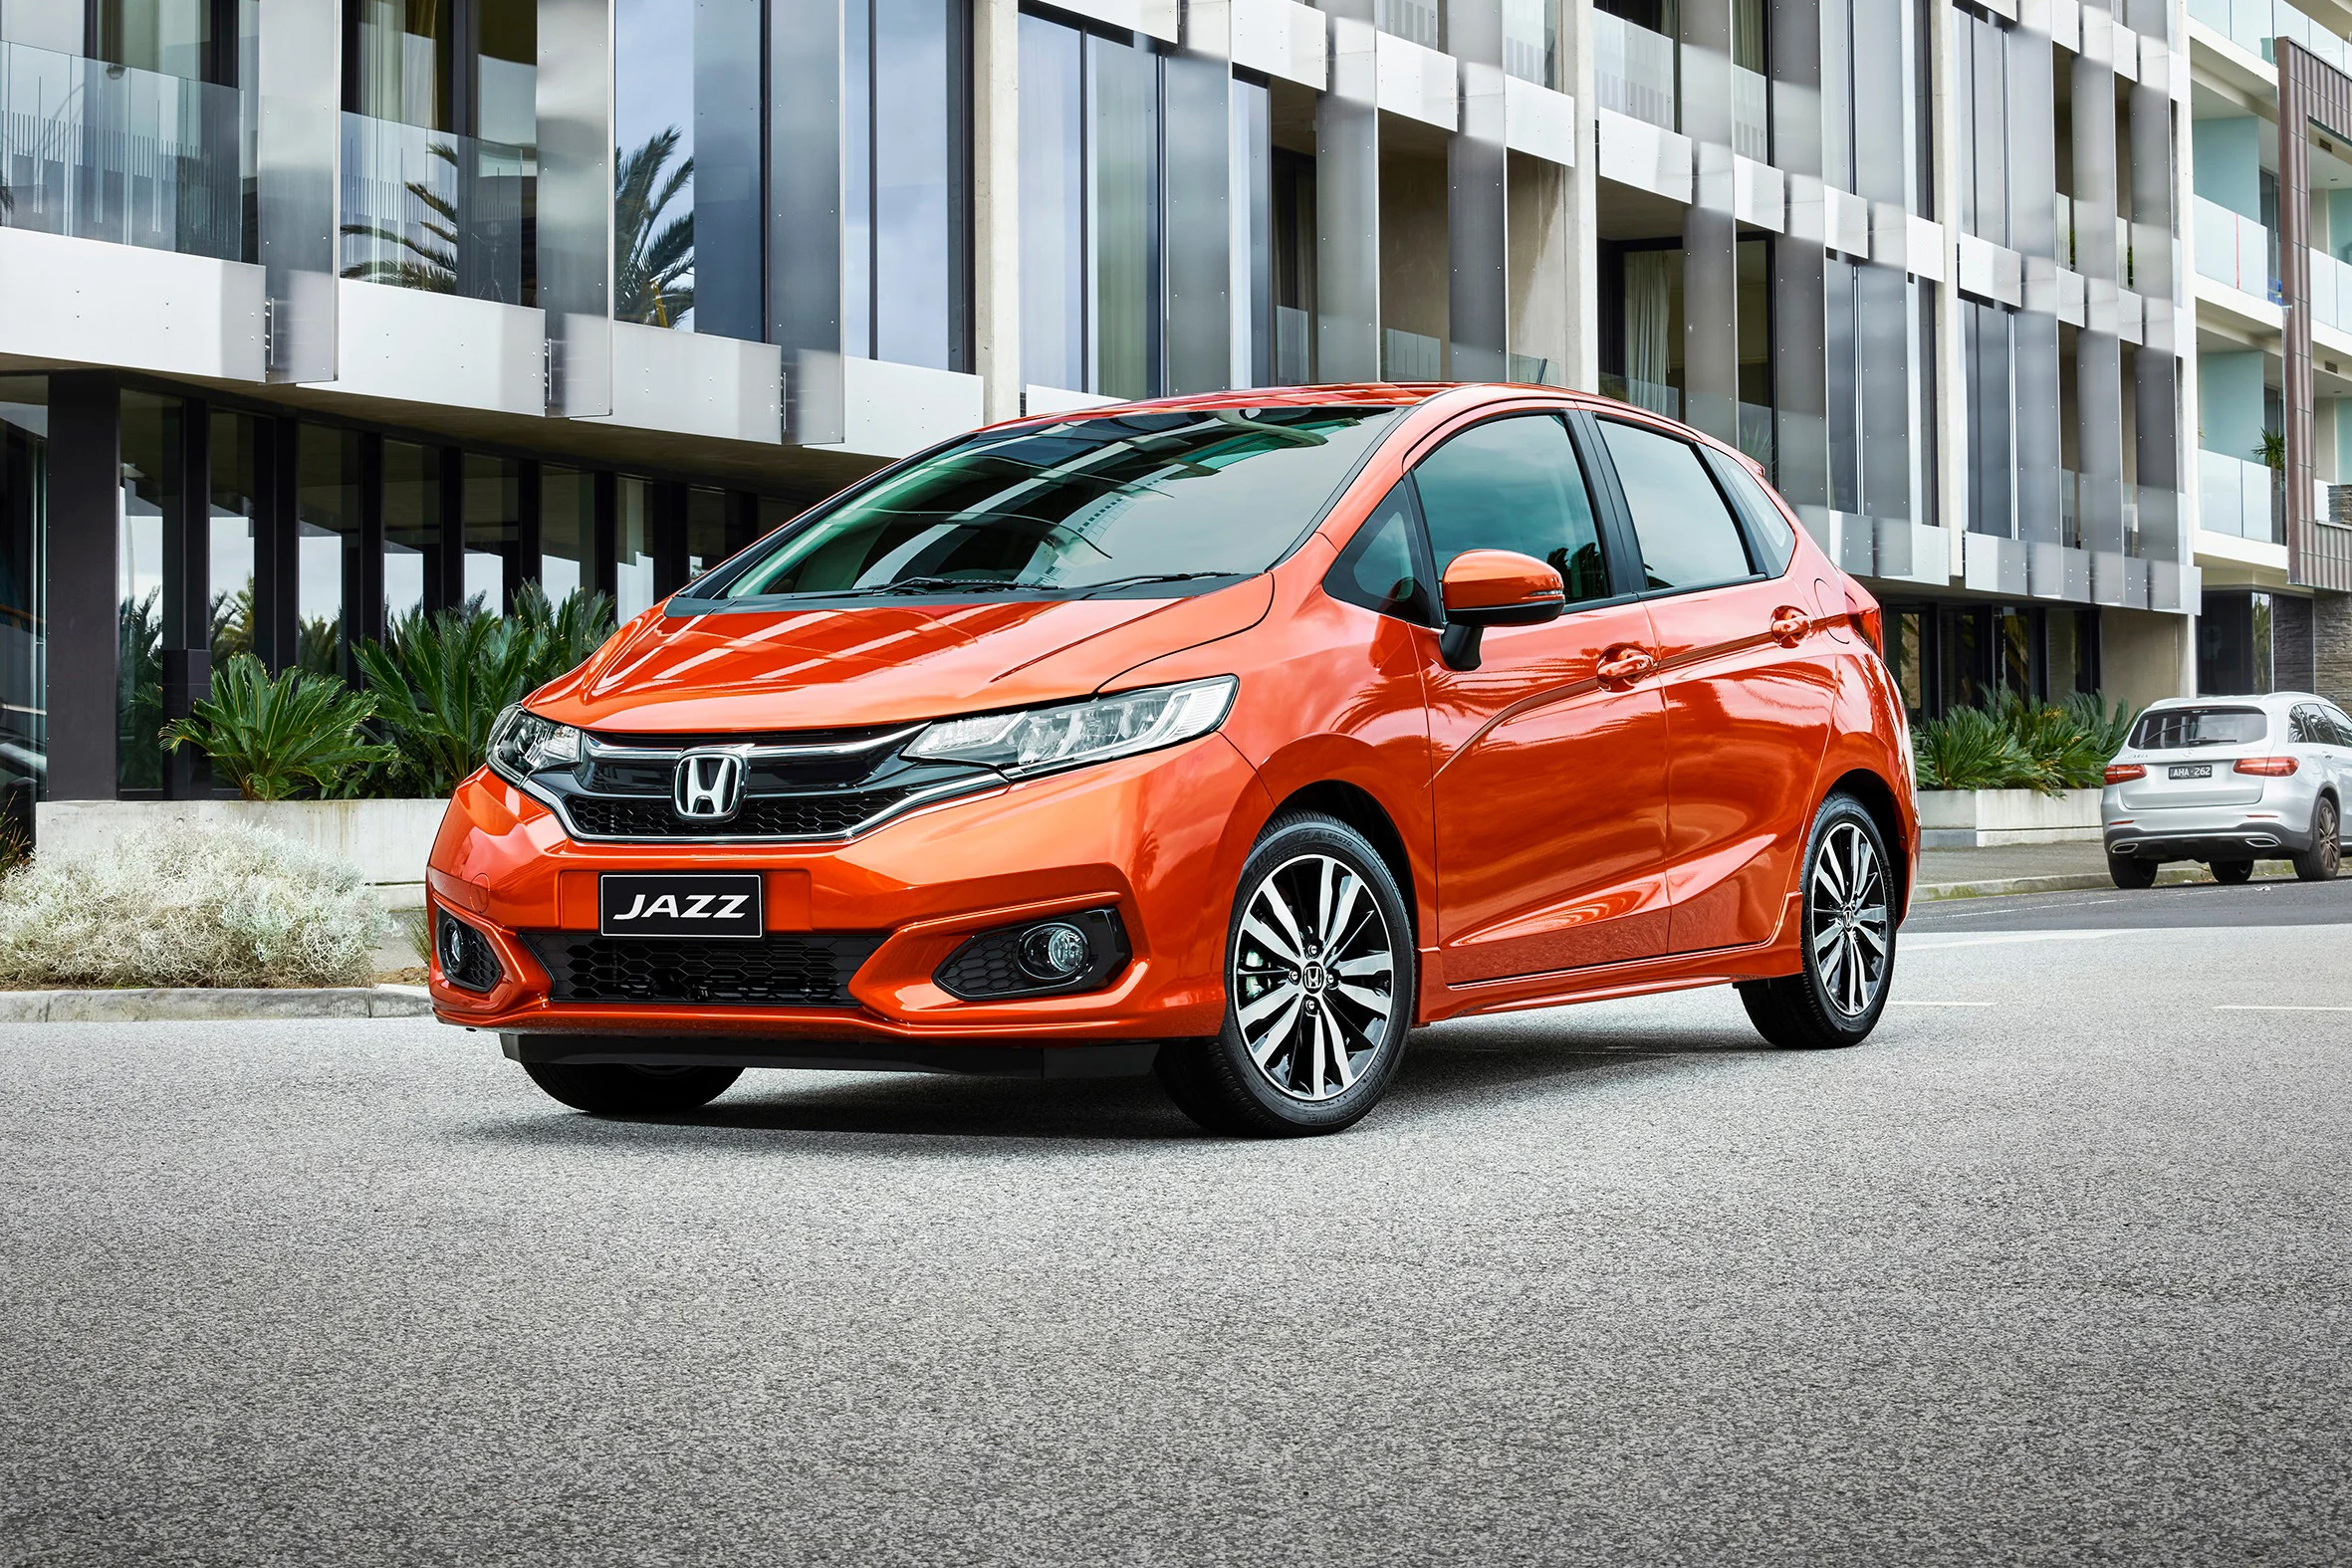 01-The-Most-Reliable-Cars-Revealed-Honda-Jazz